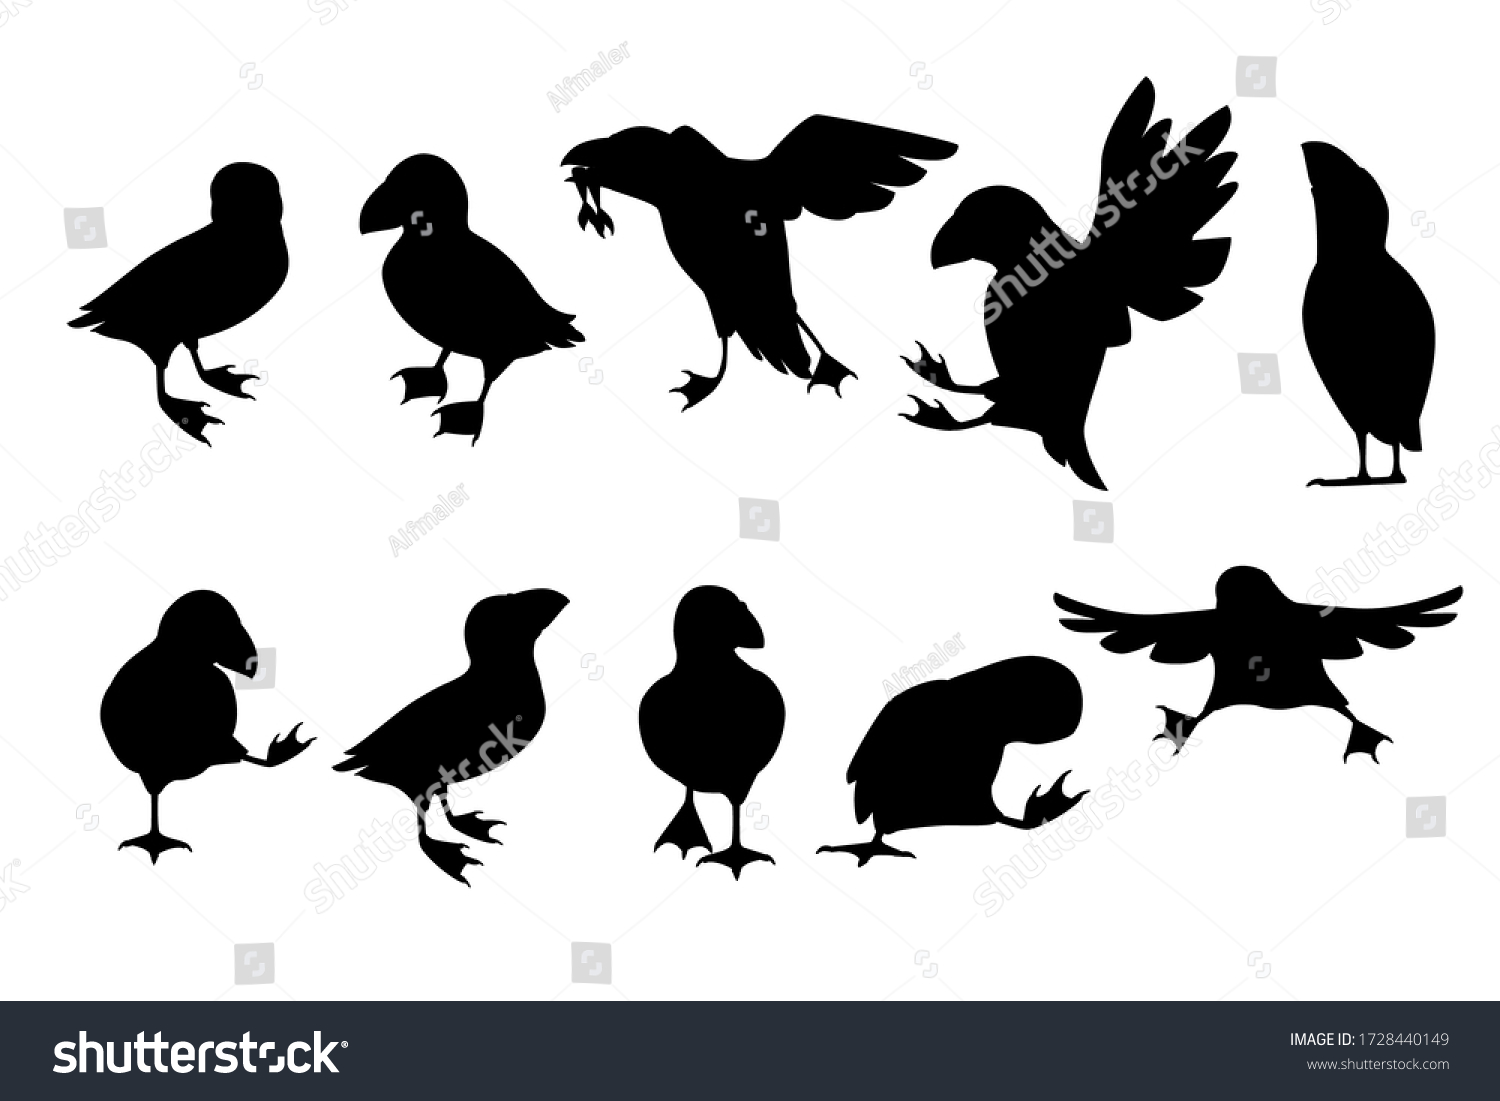 SVG of Black silhouette set of atlantic puffin bird in different poses cartoon animal design flat vector illustration isolated on white background svg